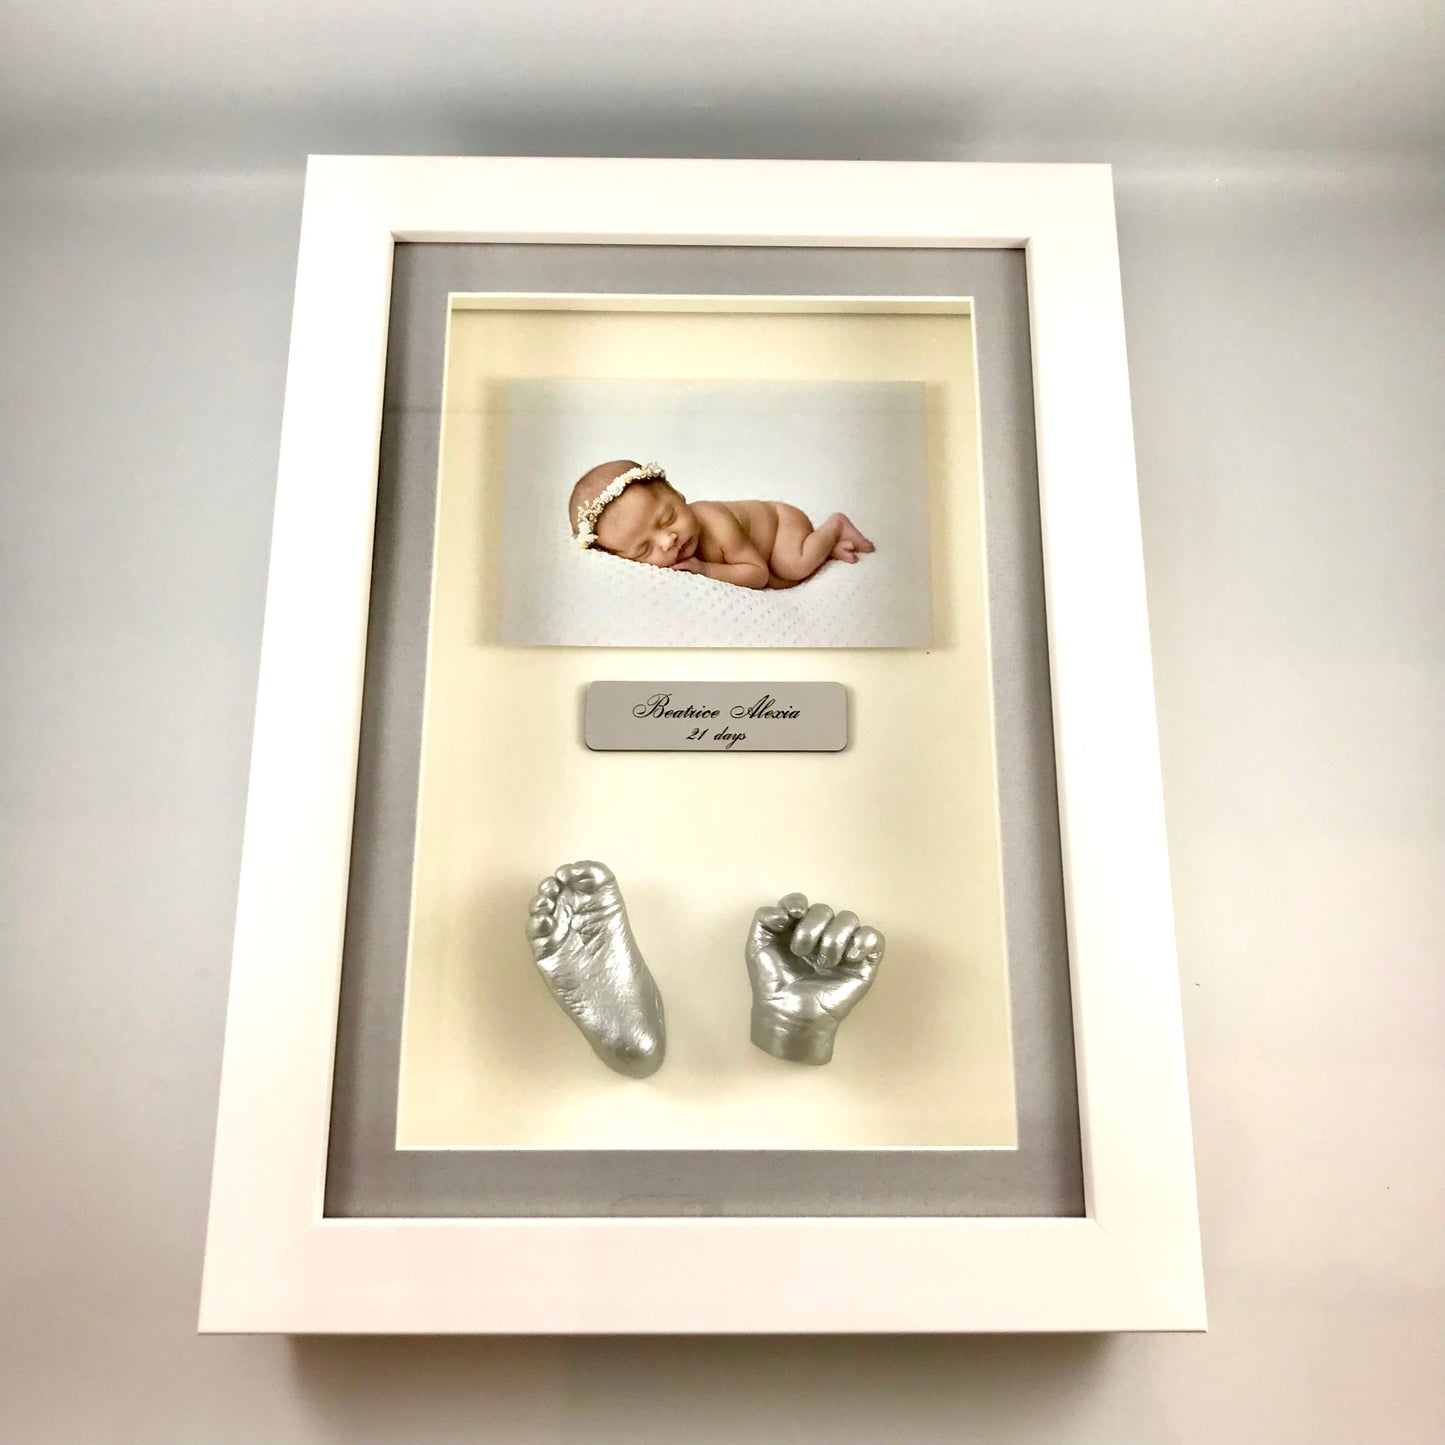 3D Framed Hand And Foot Casts With Photo